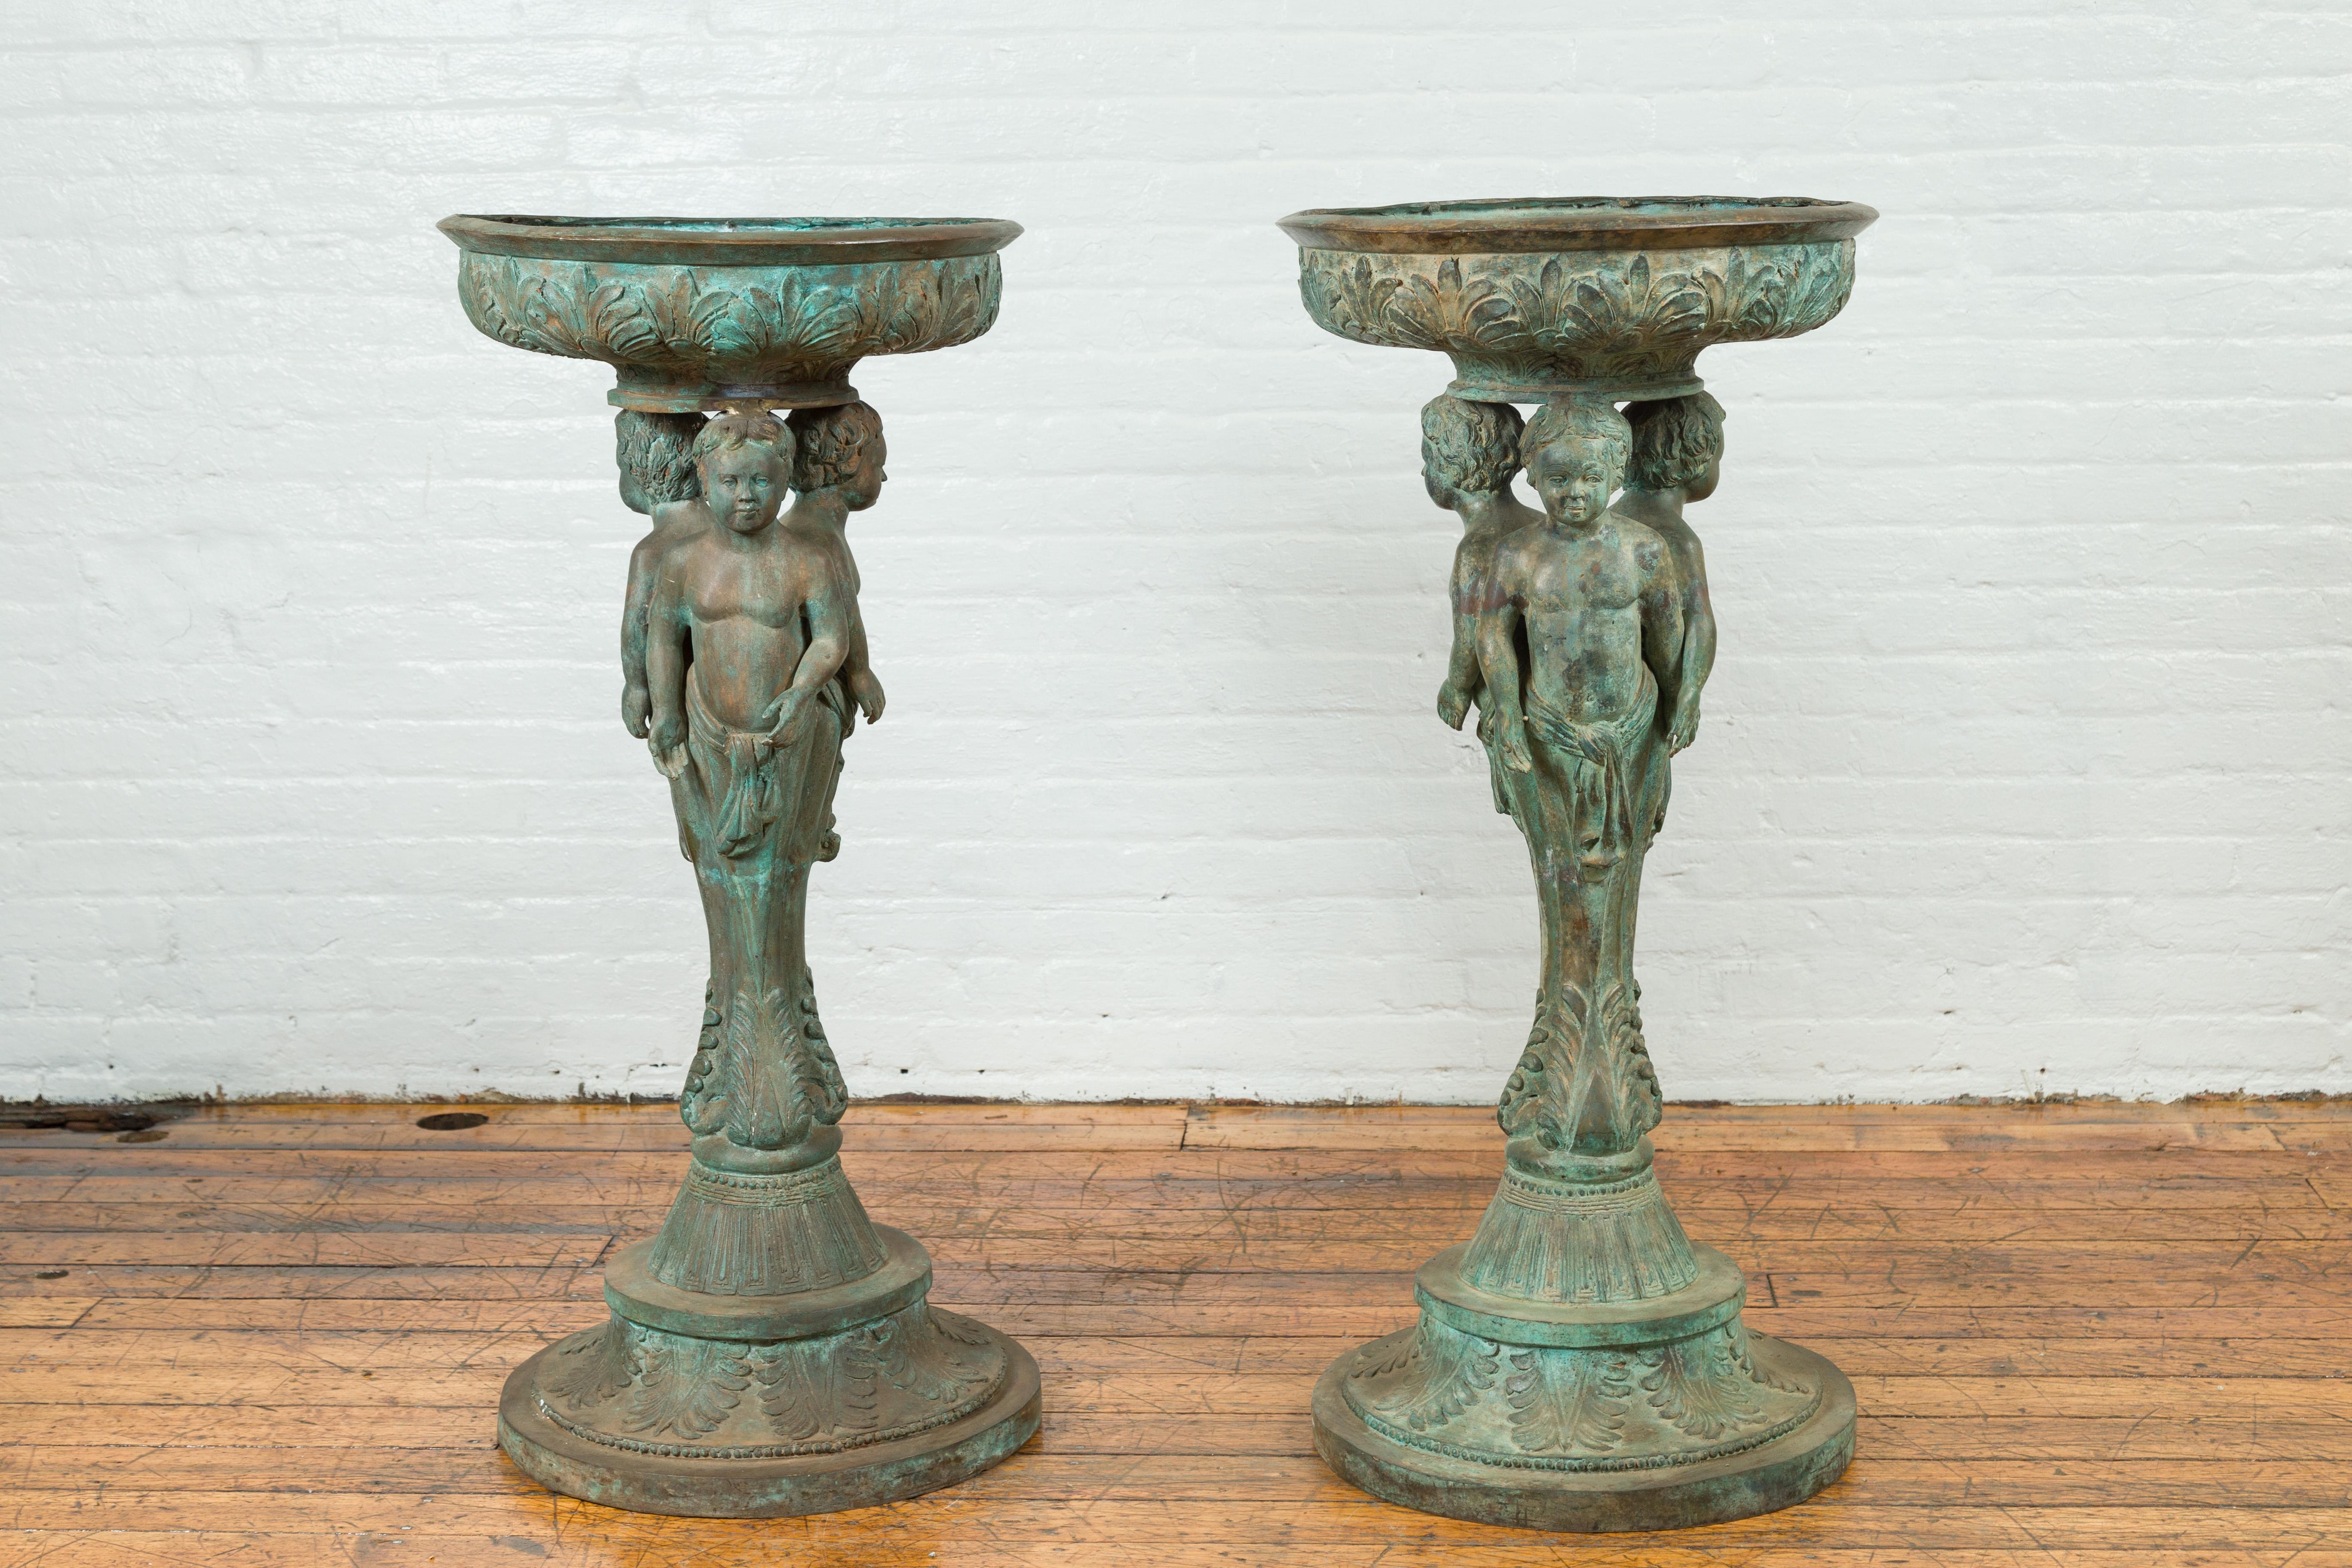 This pair of bronze lost-wax classical planter urns from the 20th century feature three cherub figures that merge together to create the base of these bronze pedestals. The three cherub boys' legs blend together to a narrow point where the base